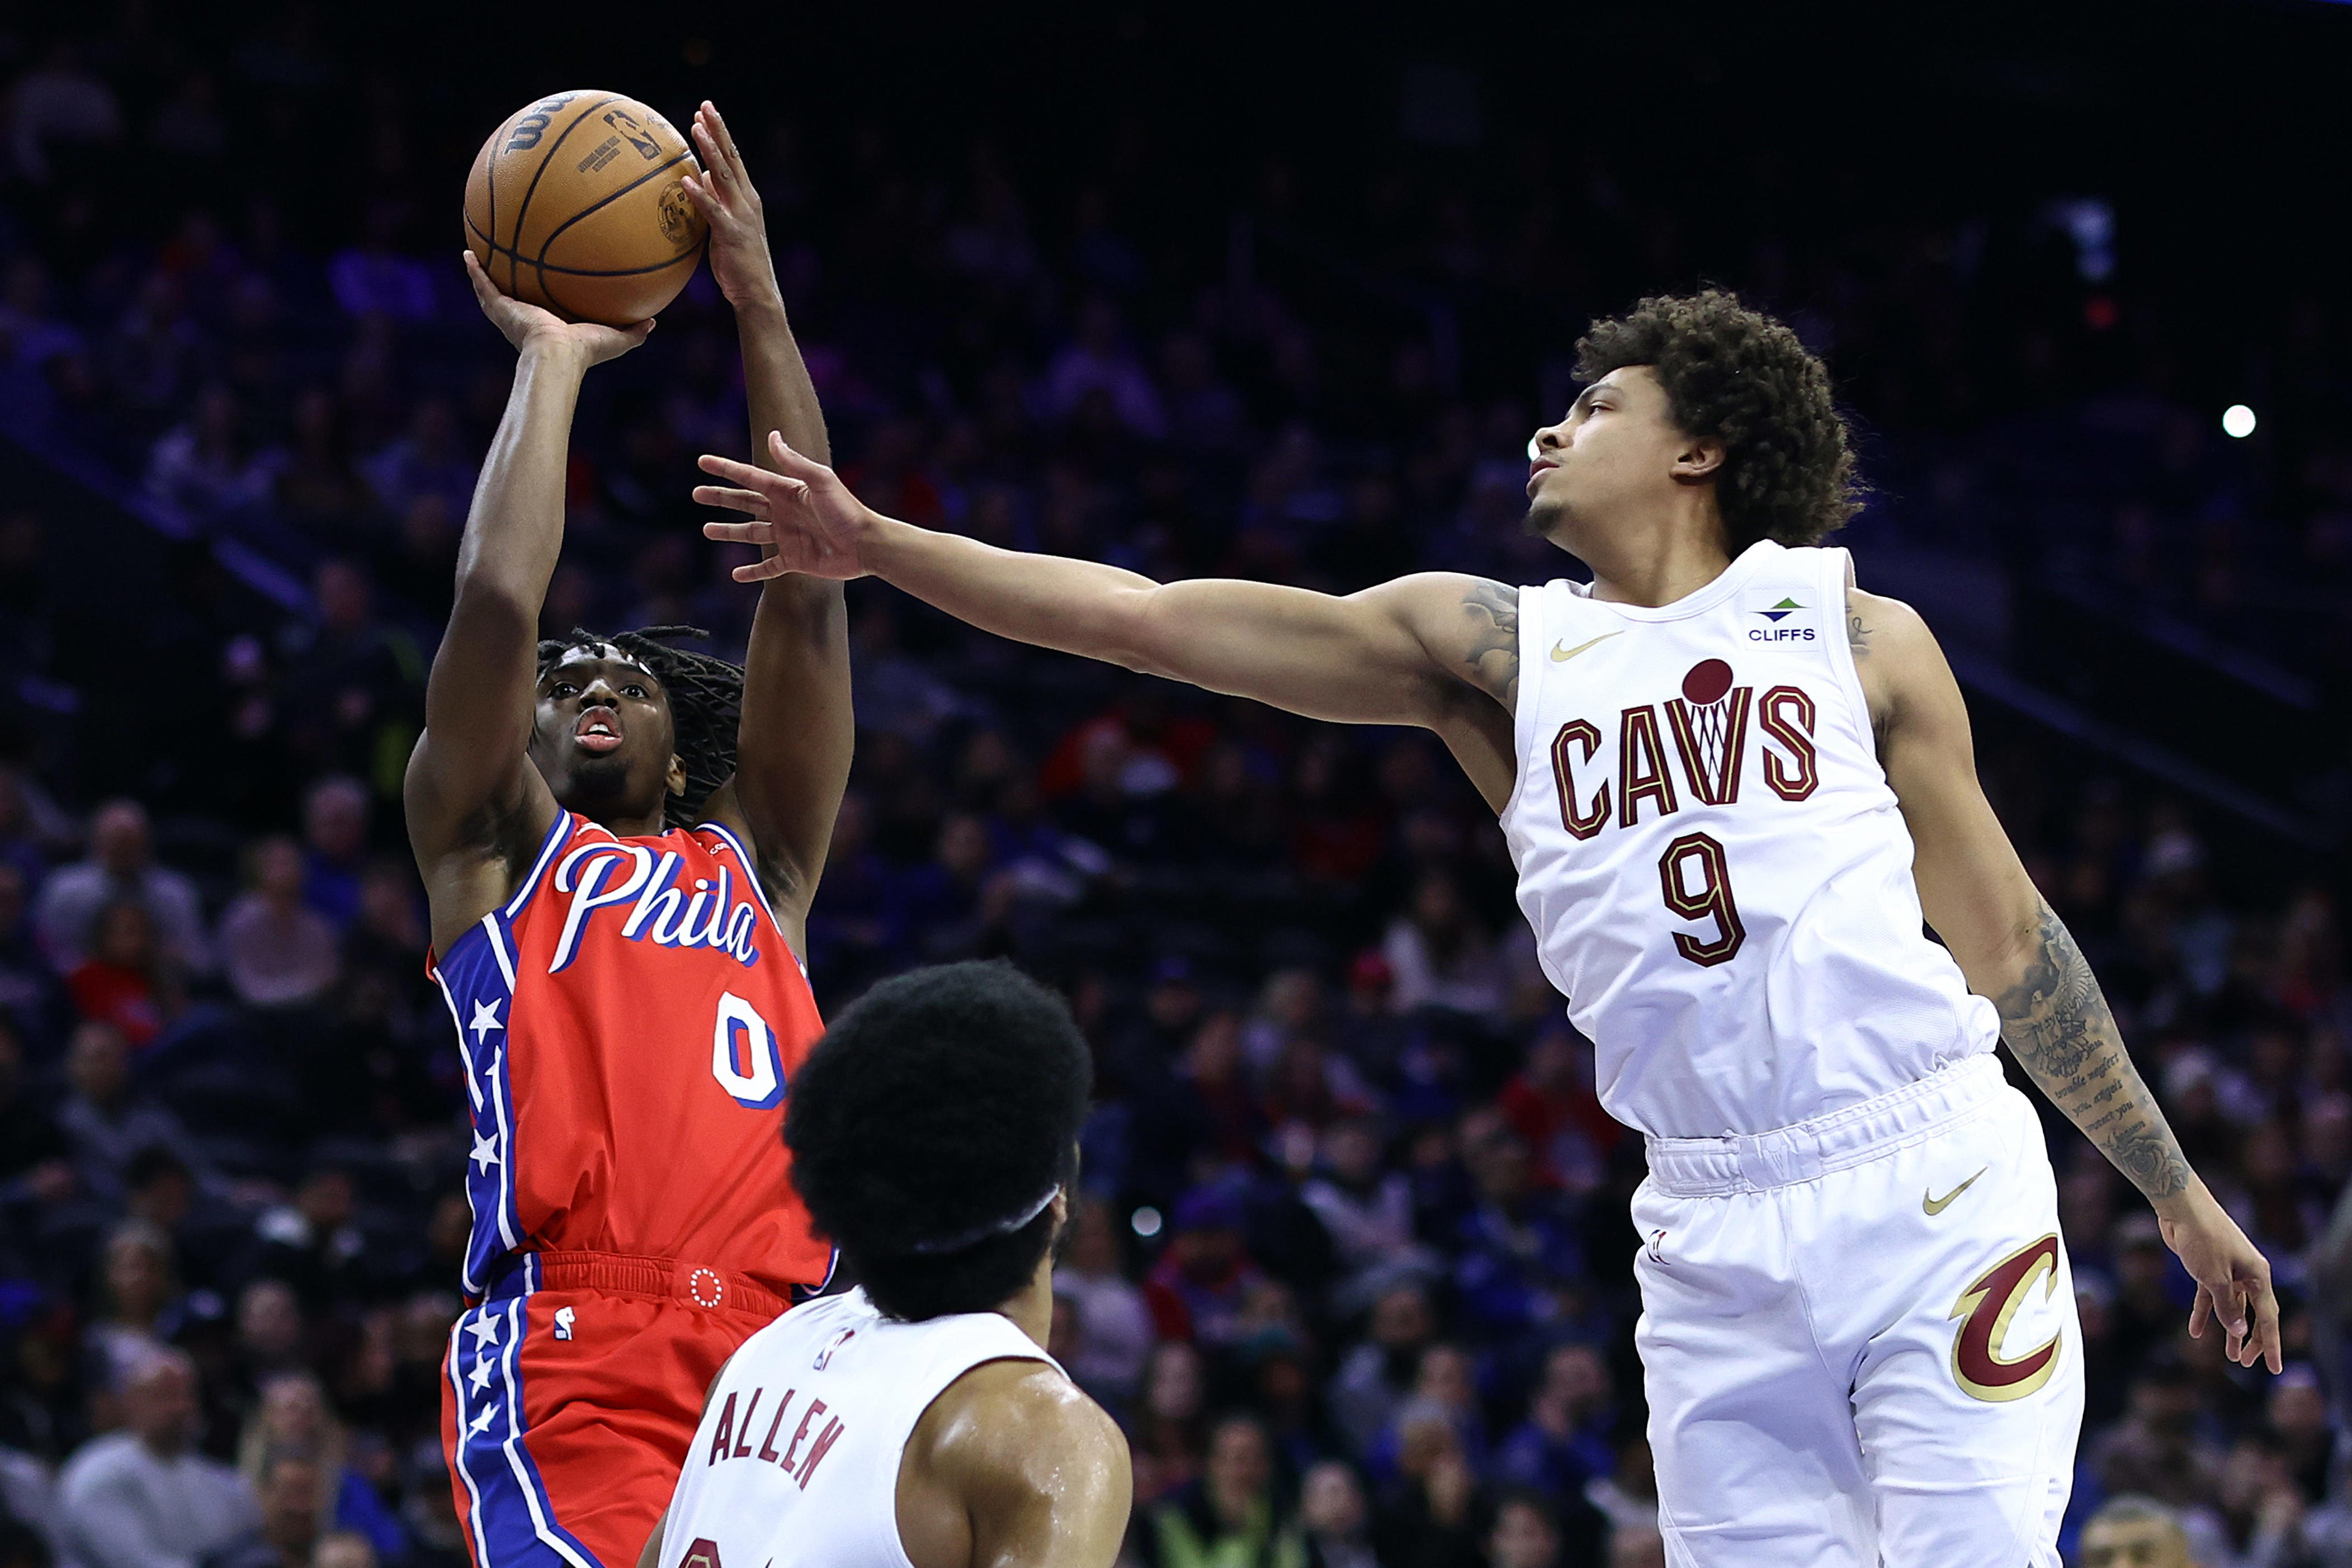 sixers single out big man paul reed after big home win over cavaliers